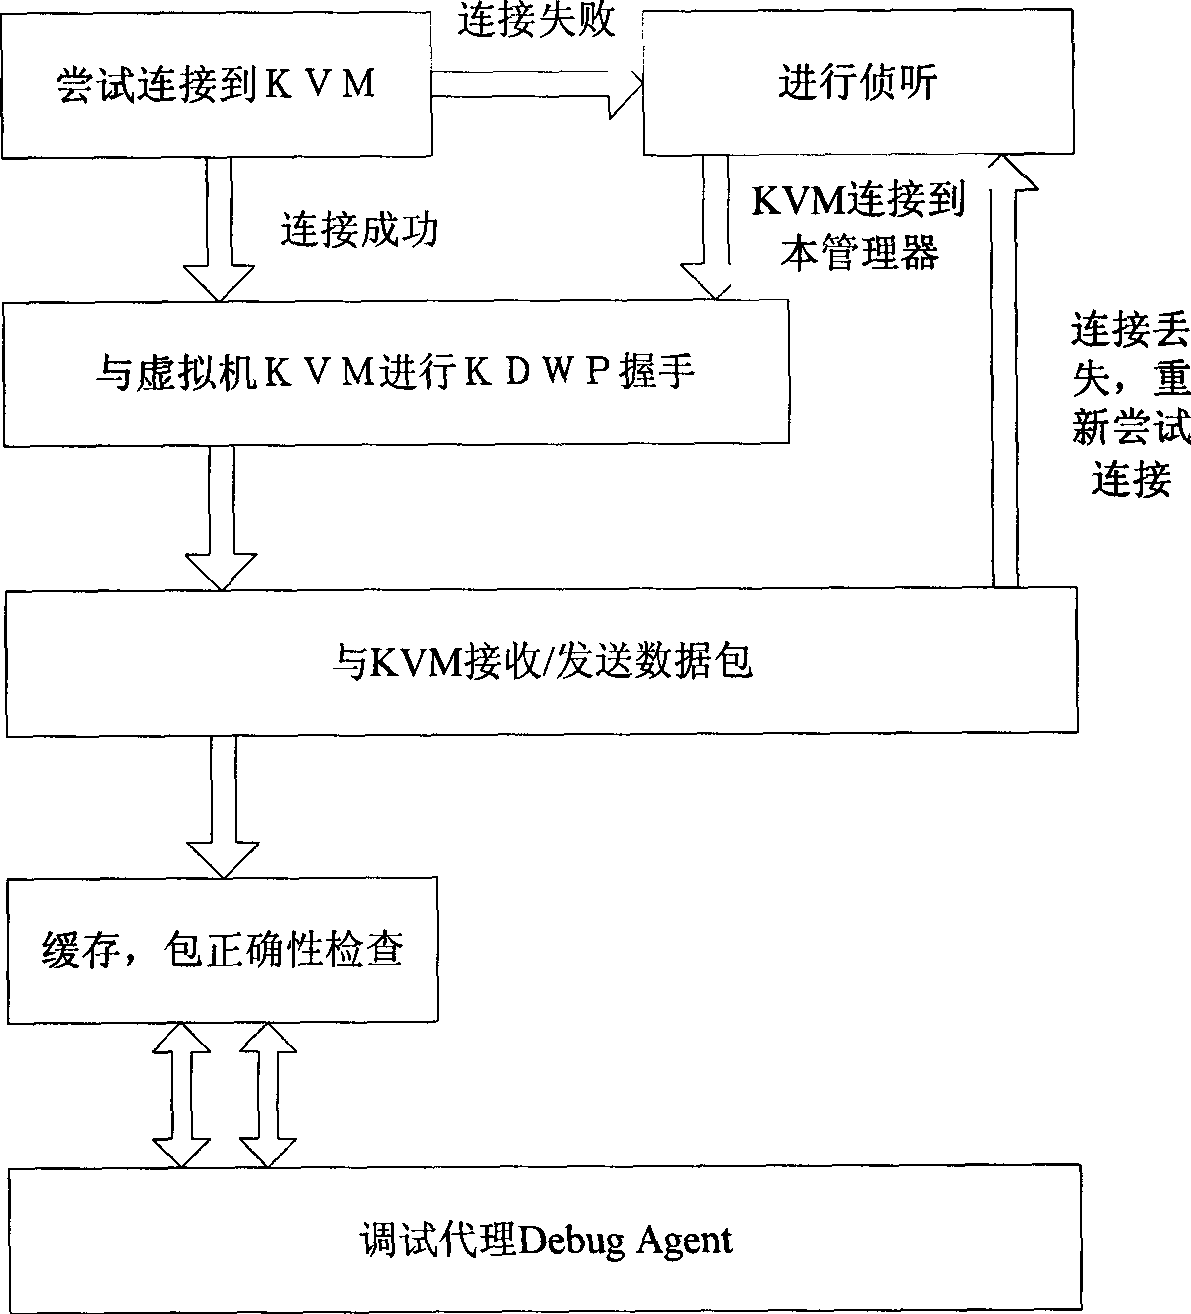 KDWP terminal communication connecting manager method of embedded remote debugging proxy